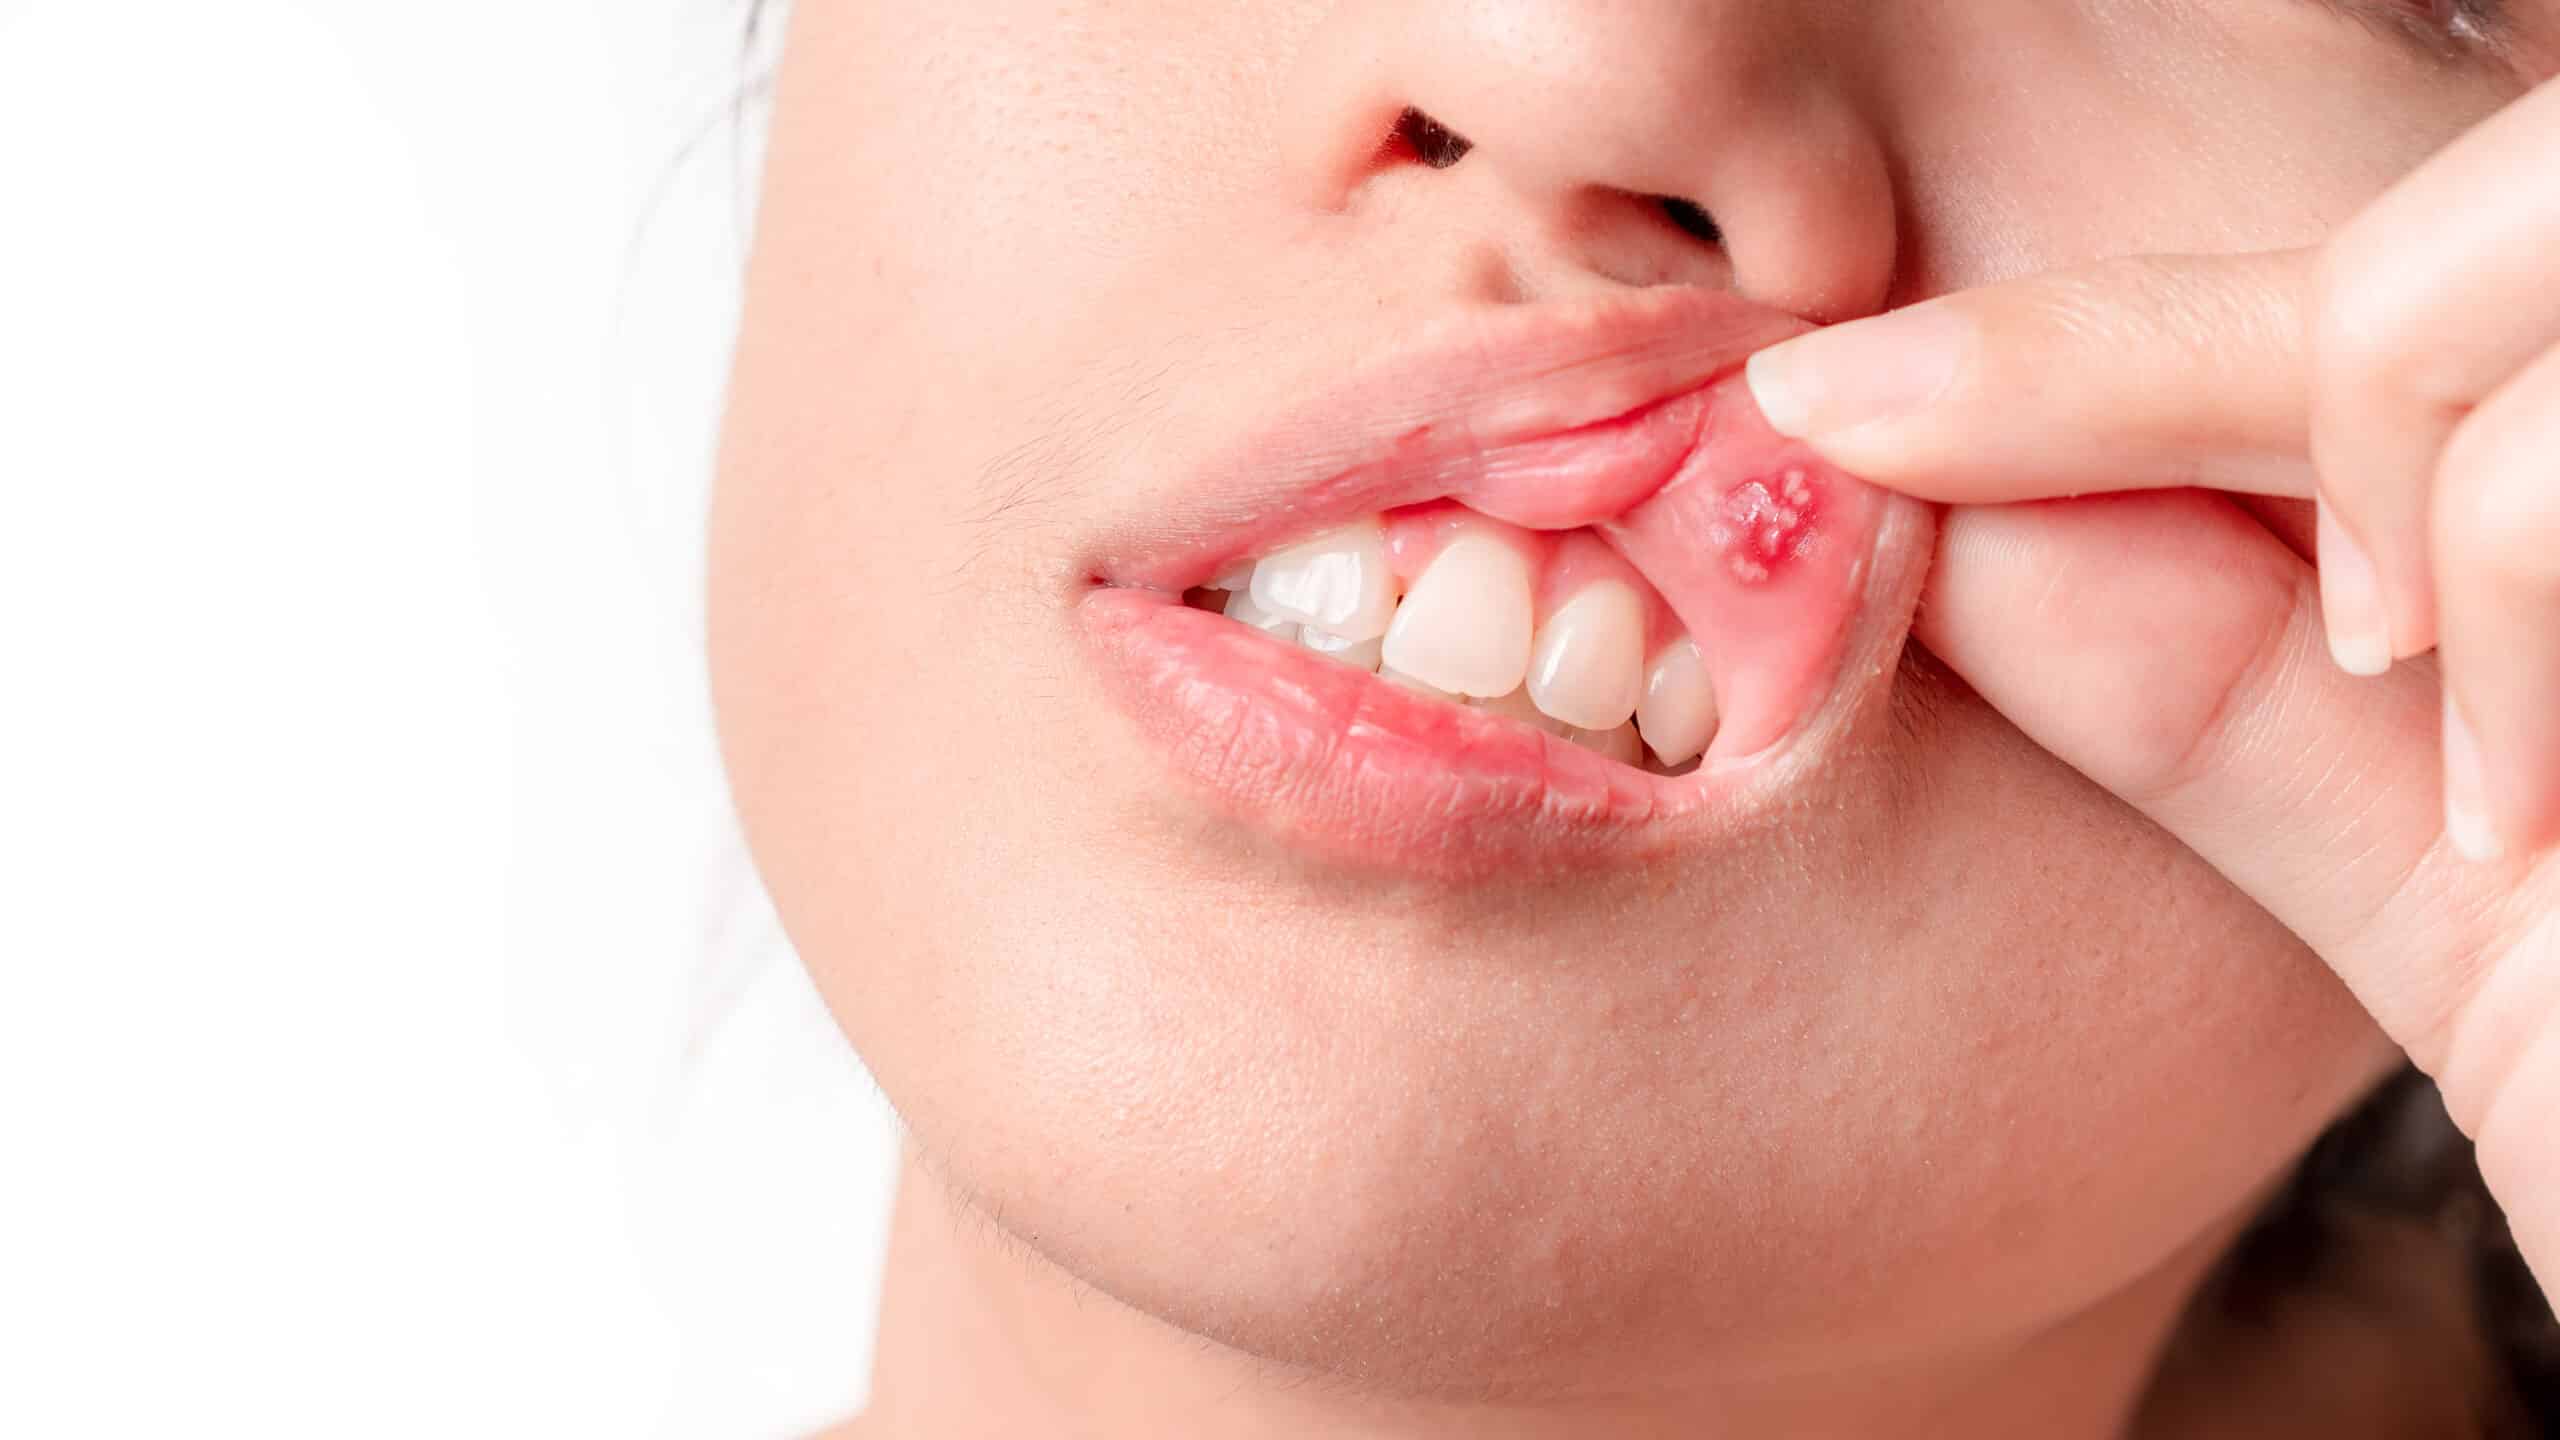 Asian women have aphthous ulcers on mouth